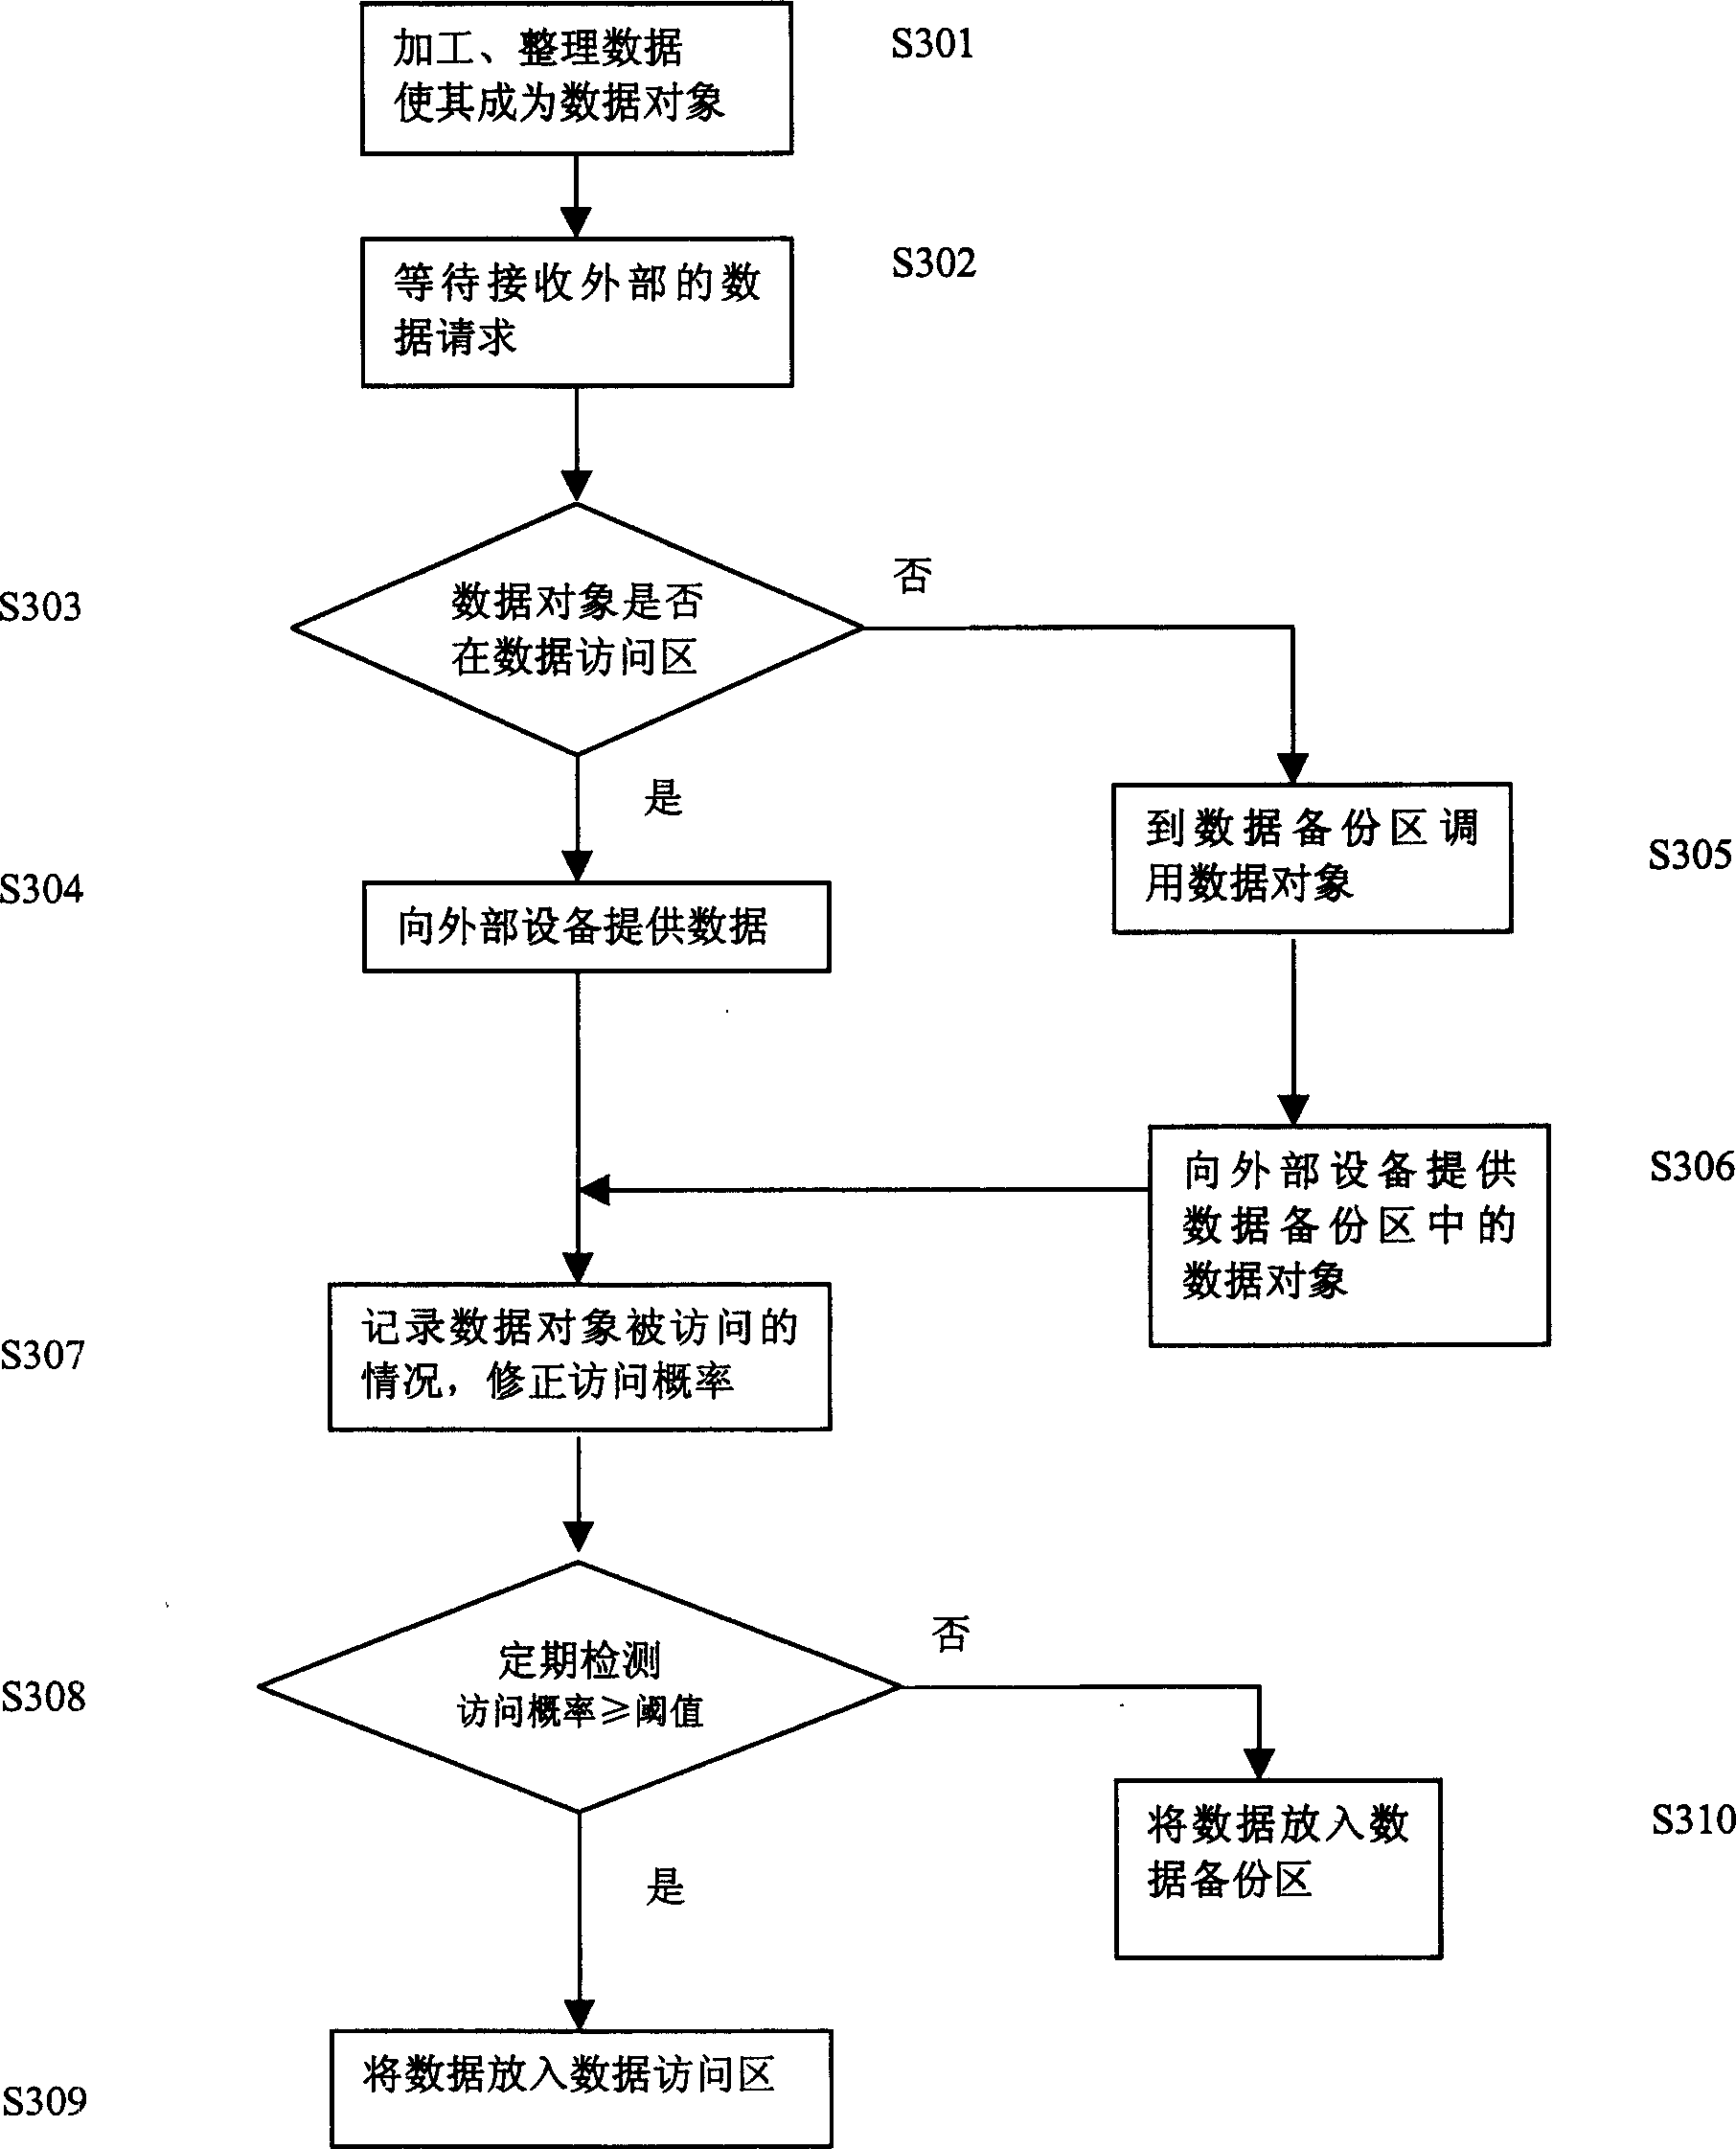 Method for dynamic transferring data and its storing system